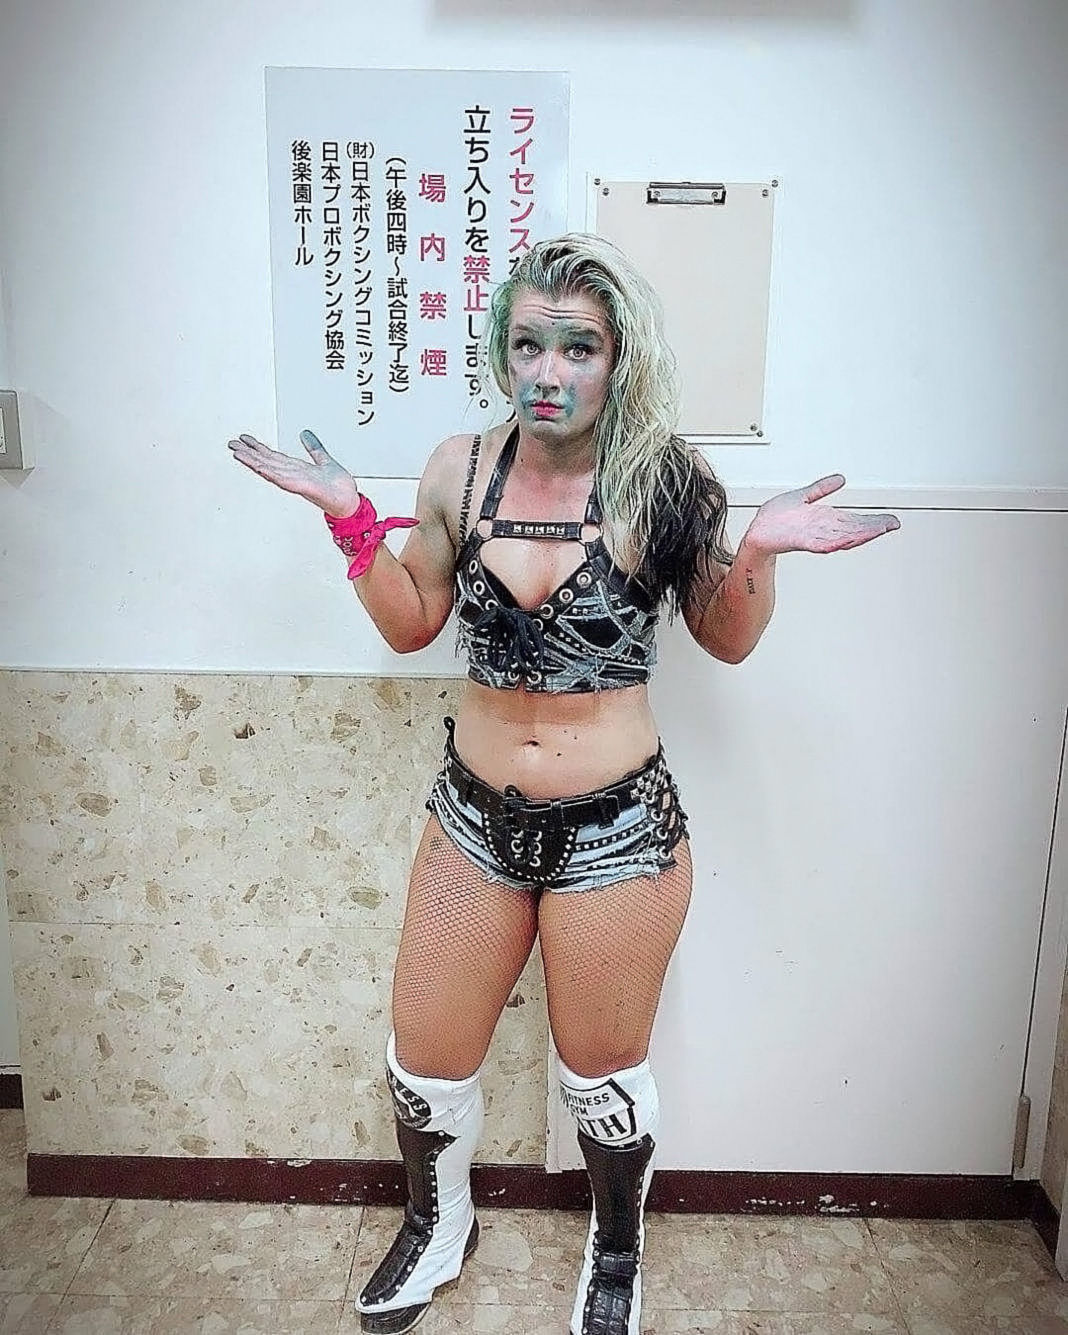 Toni Storm sexy images.